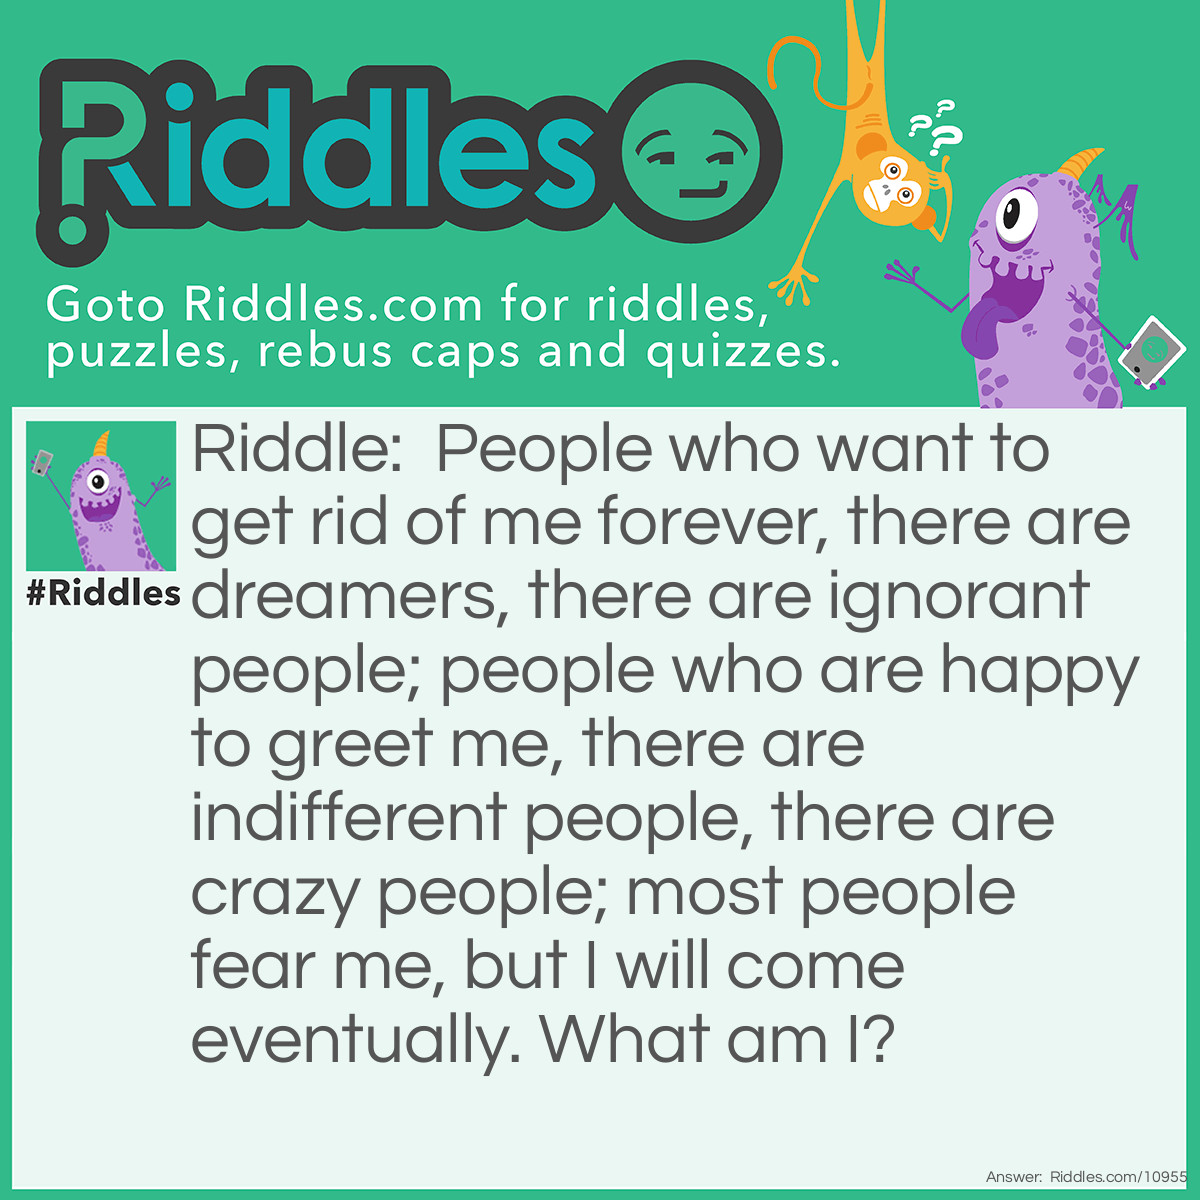 Riddle: People who want to get rid of me forever, there are dreamers, there are ignorant people; people who are happy to greet me, there are indifferent people, there are crazy people; most people fear me, but I will come eventually. What am I? Answer: Death.